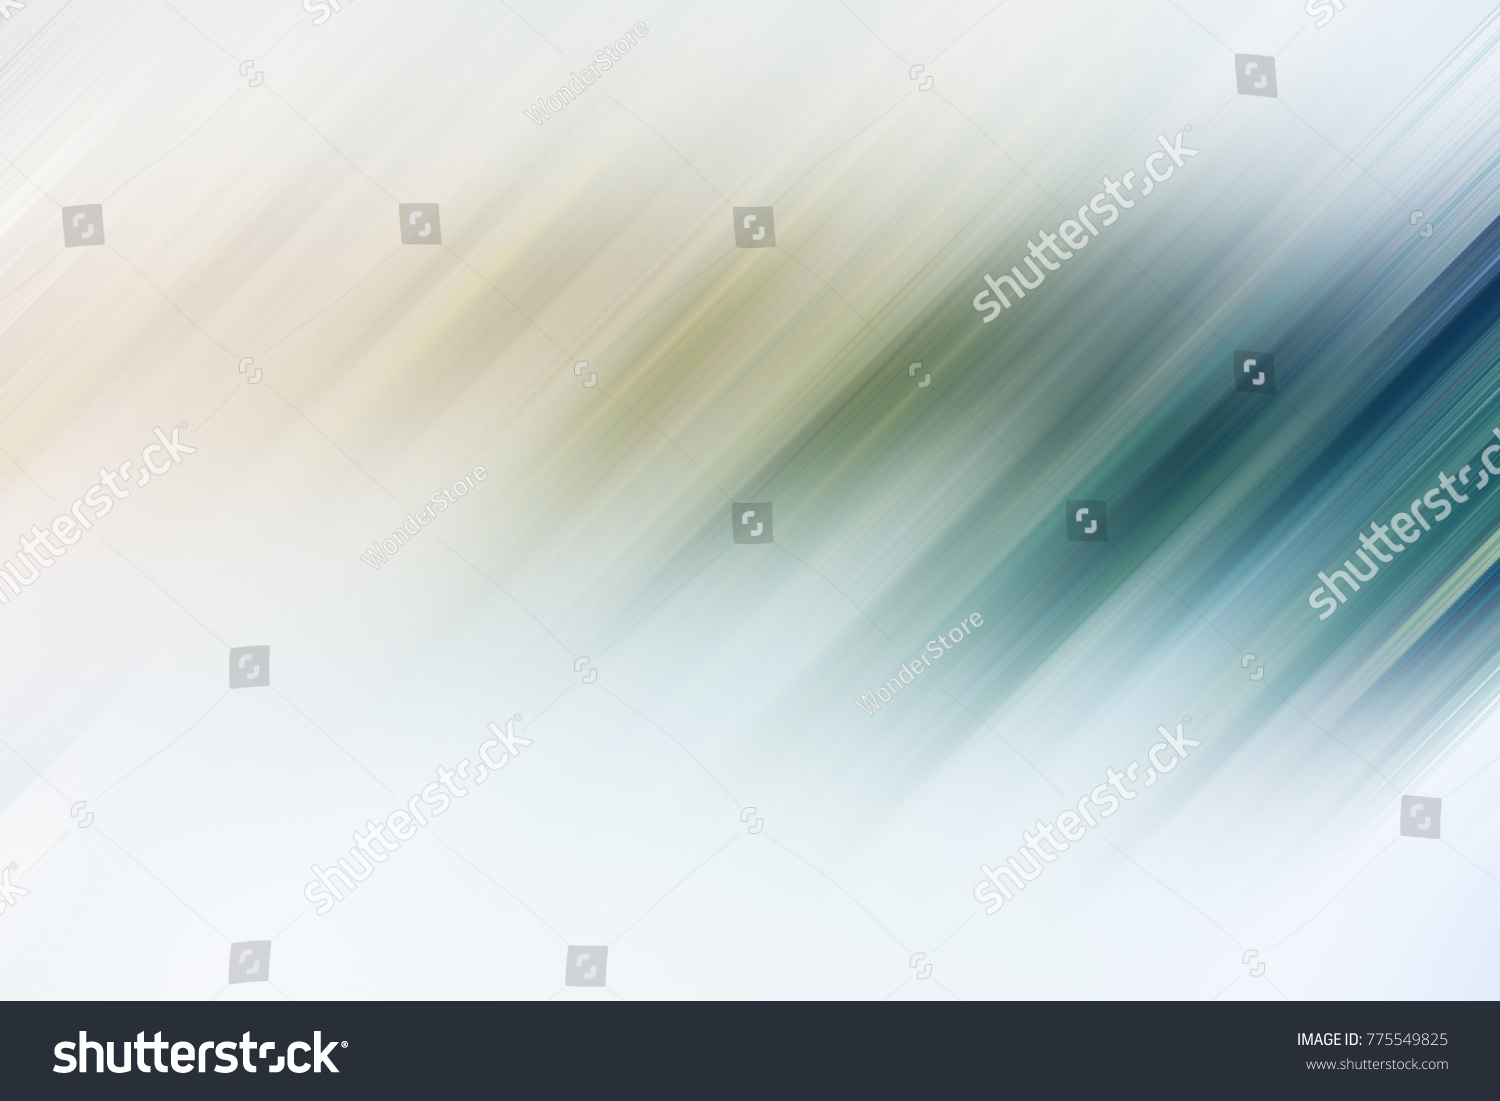 Light abstract gradient motion blurred background. Colorful lines texture wallpaper #775549825